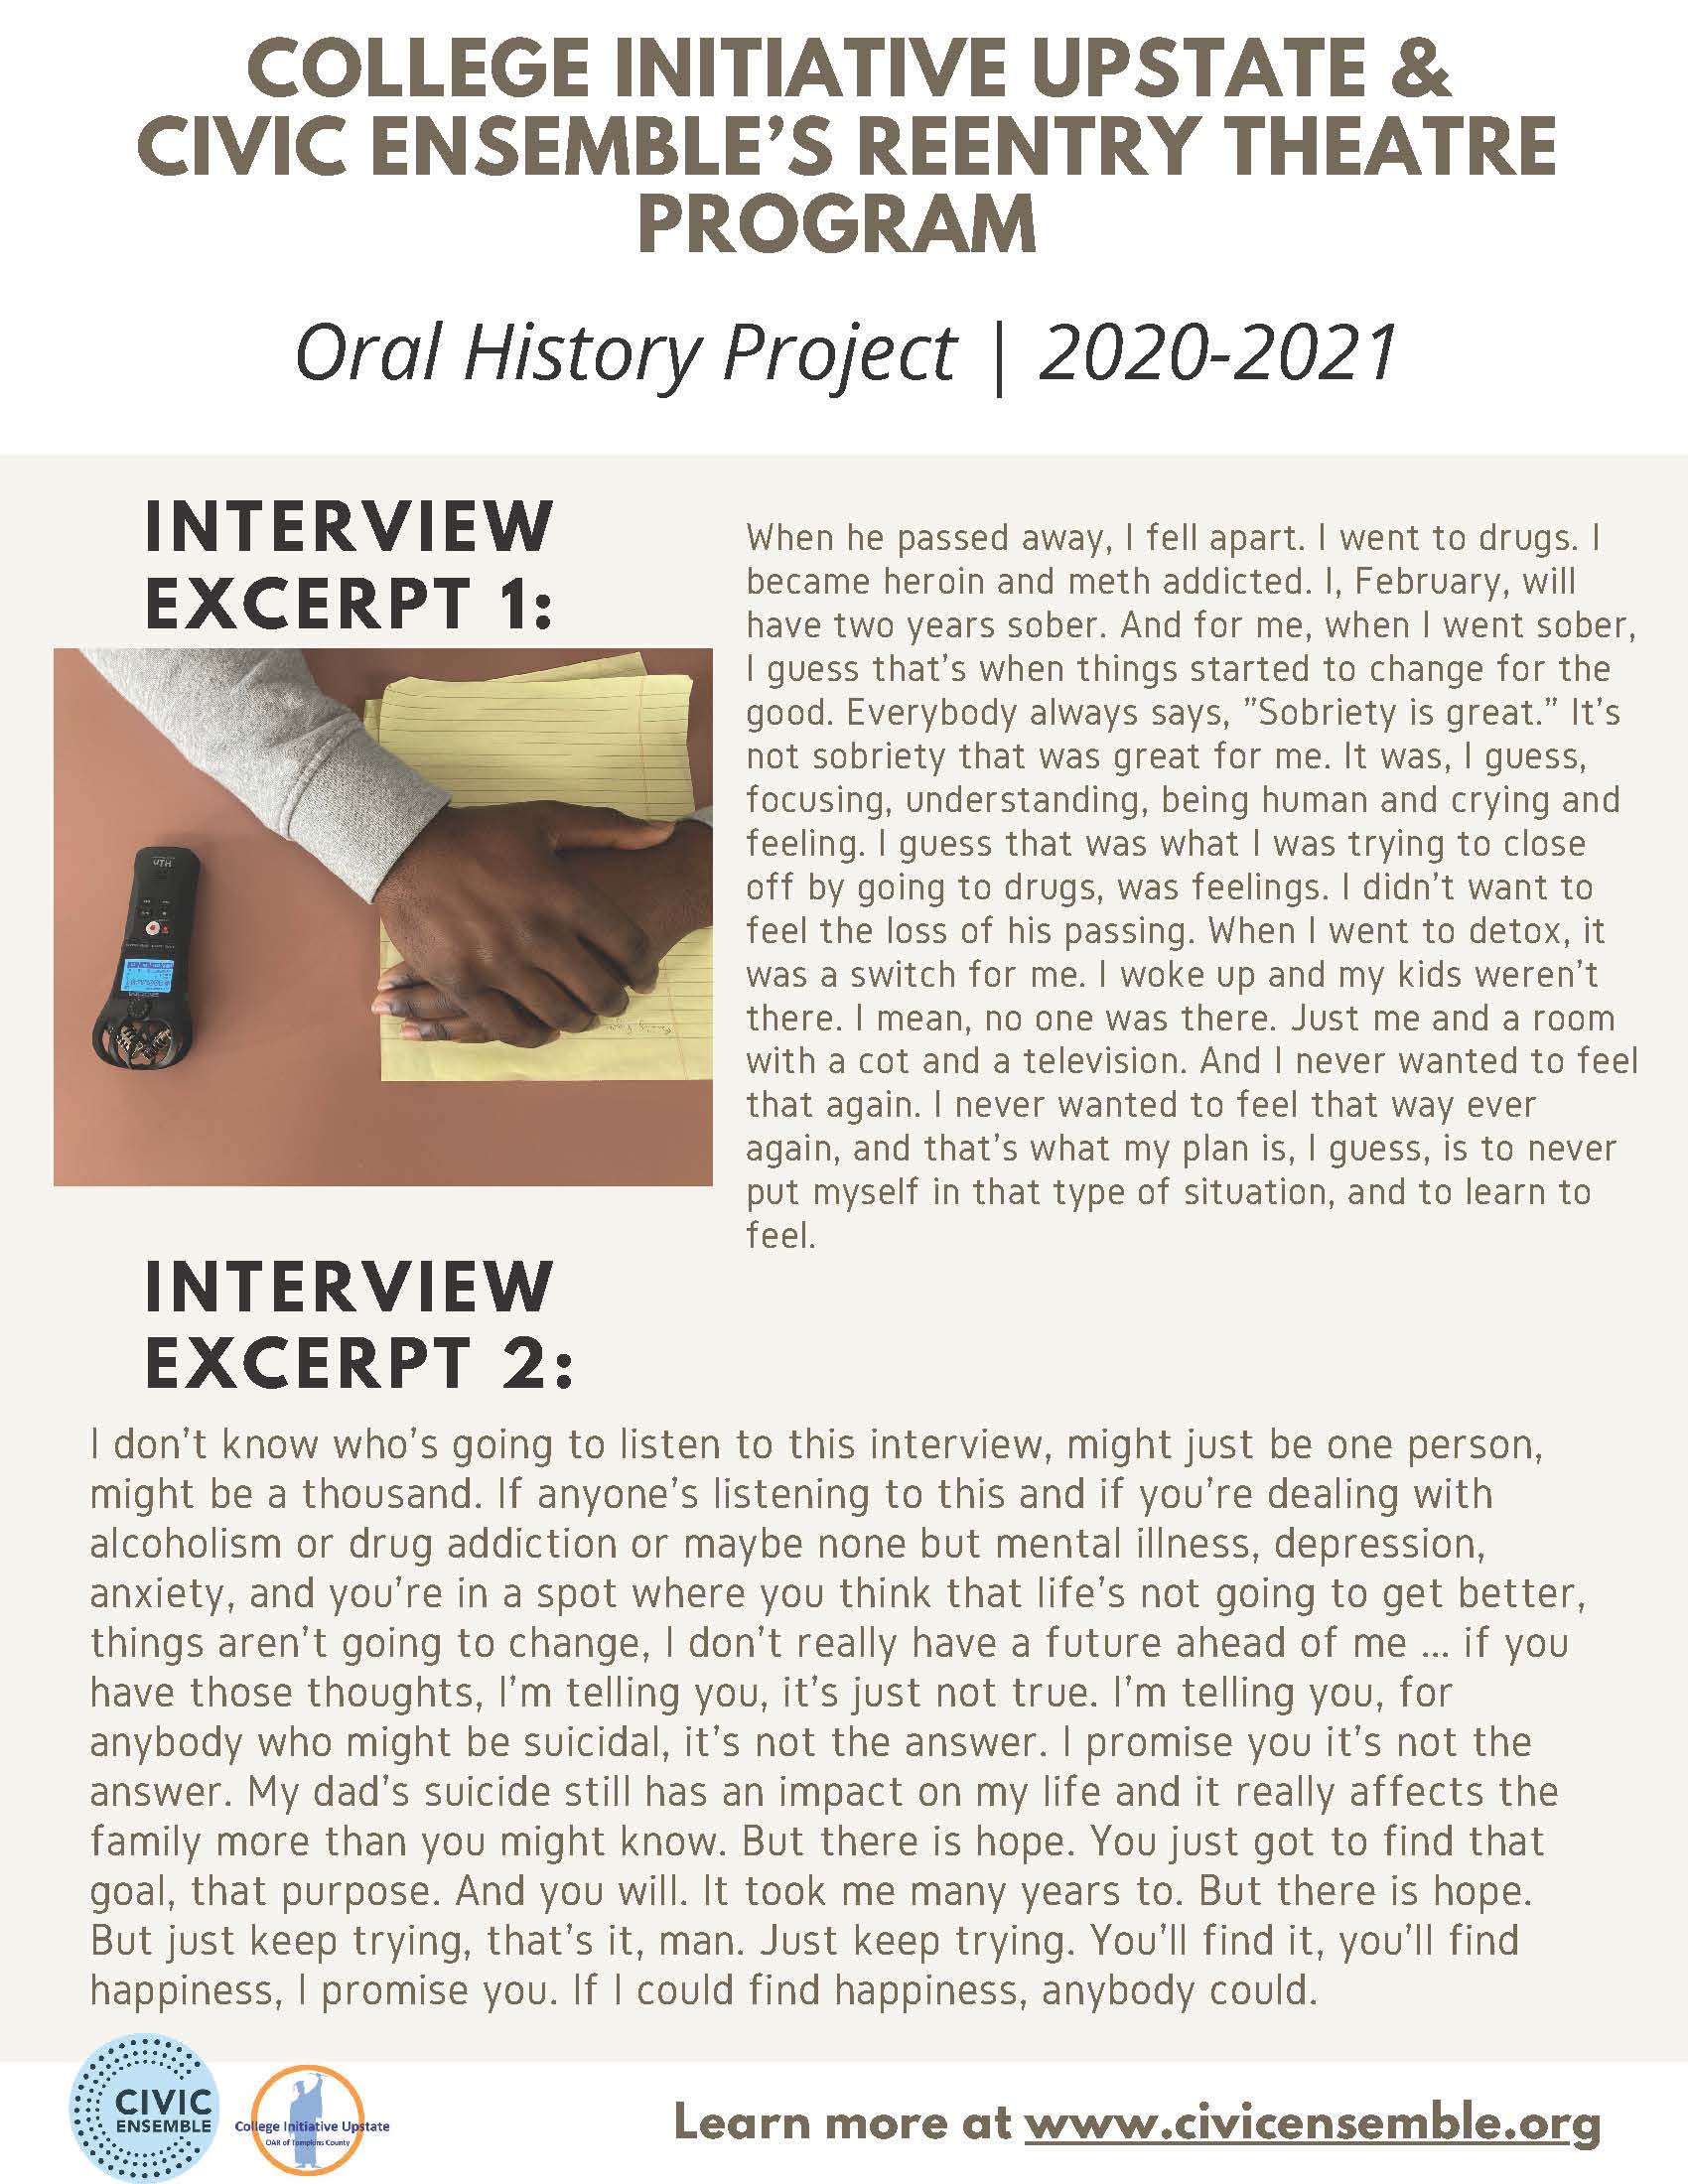 College Initiative Upstate & Civic Ensemble’s ReEntry Theatre Program - oral history project (4)_Page_1